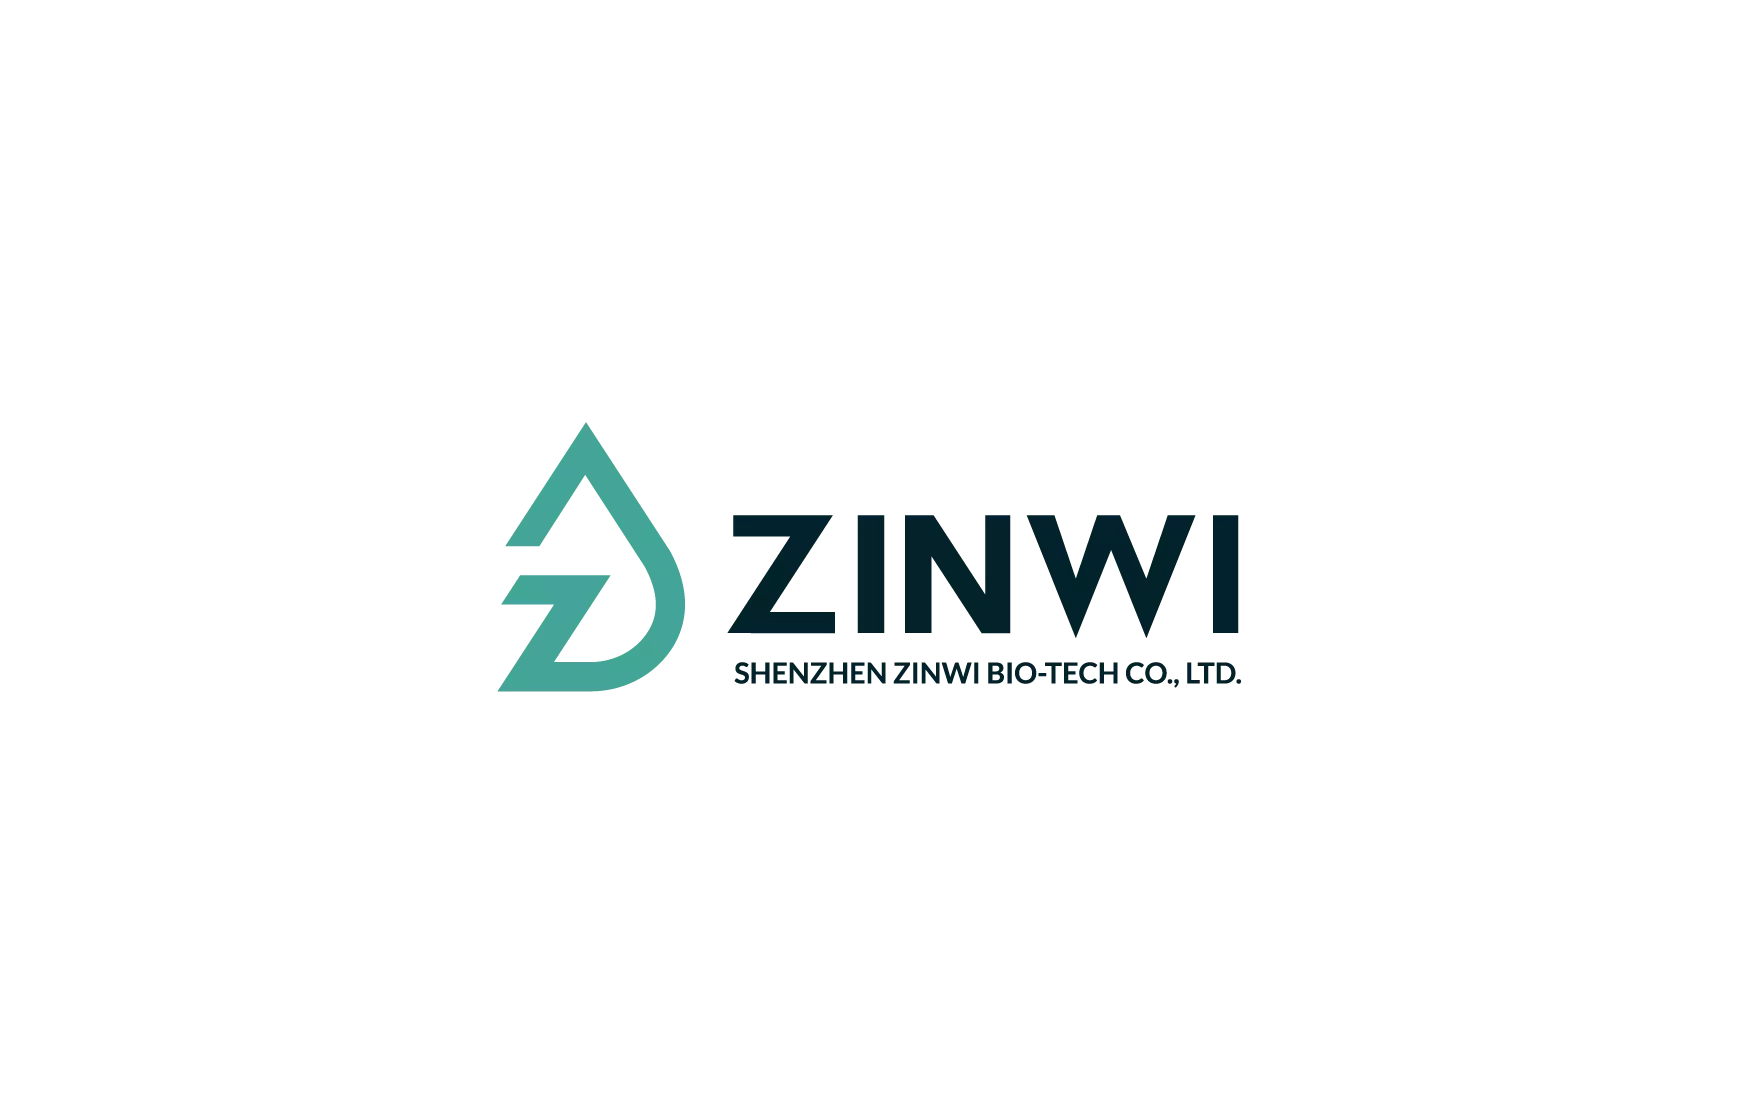 Zinwi will place more emphasis on product research and development and provide diversified products to meet the needs of global markets.